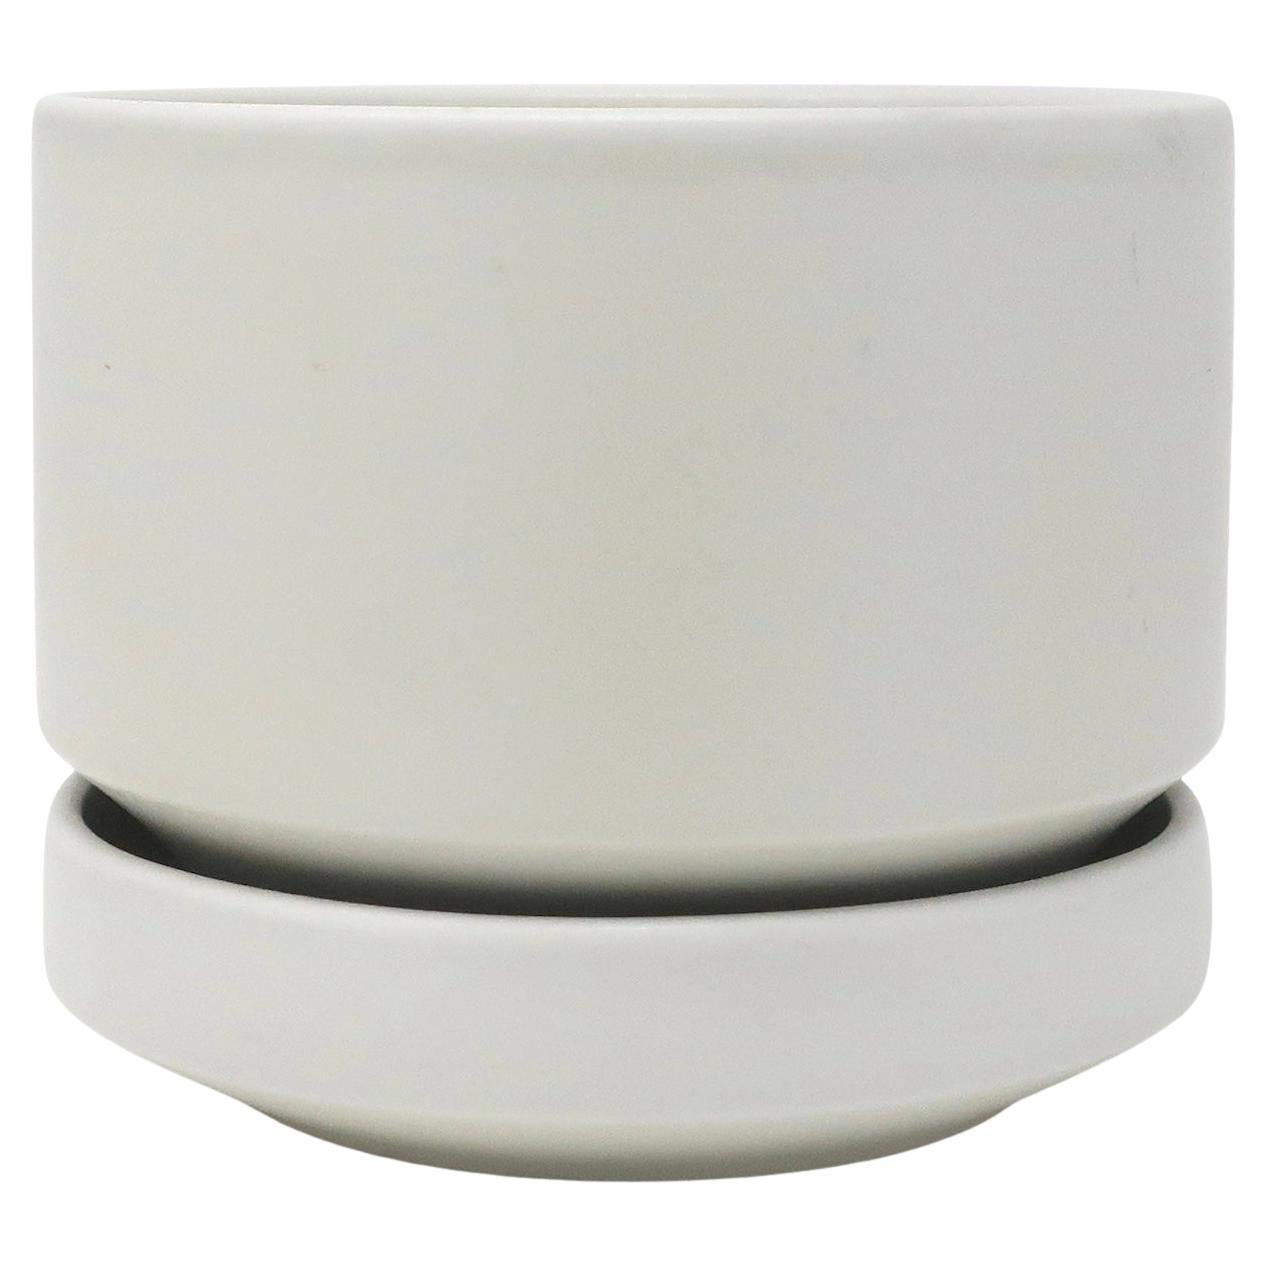 1960s White Modernist Planter by Richard Lindh for Arabia Finland For Sale